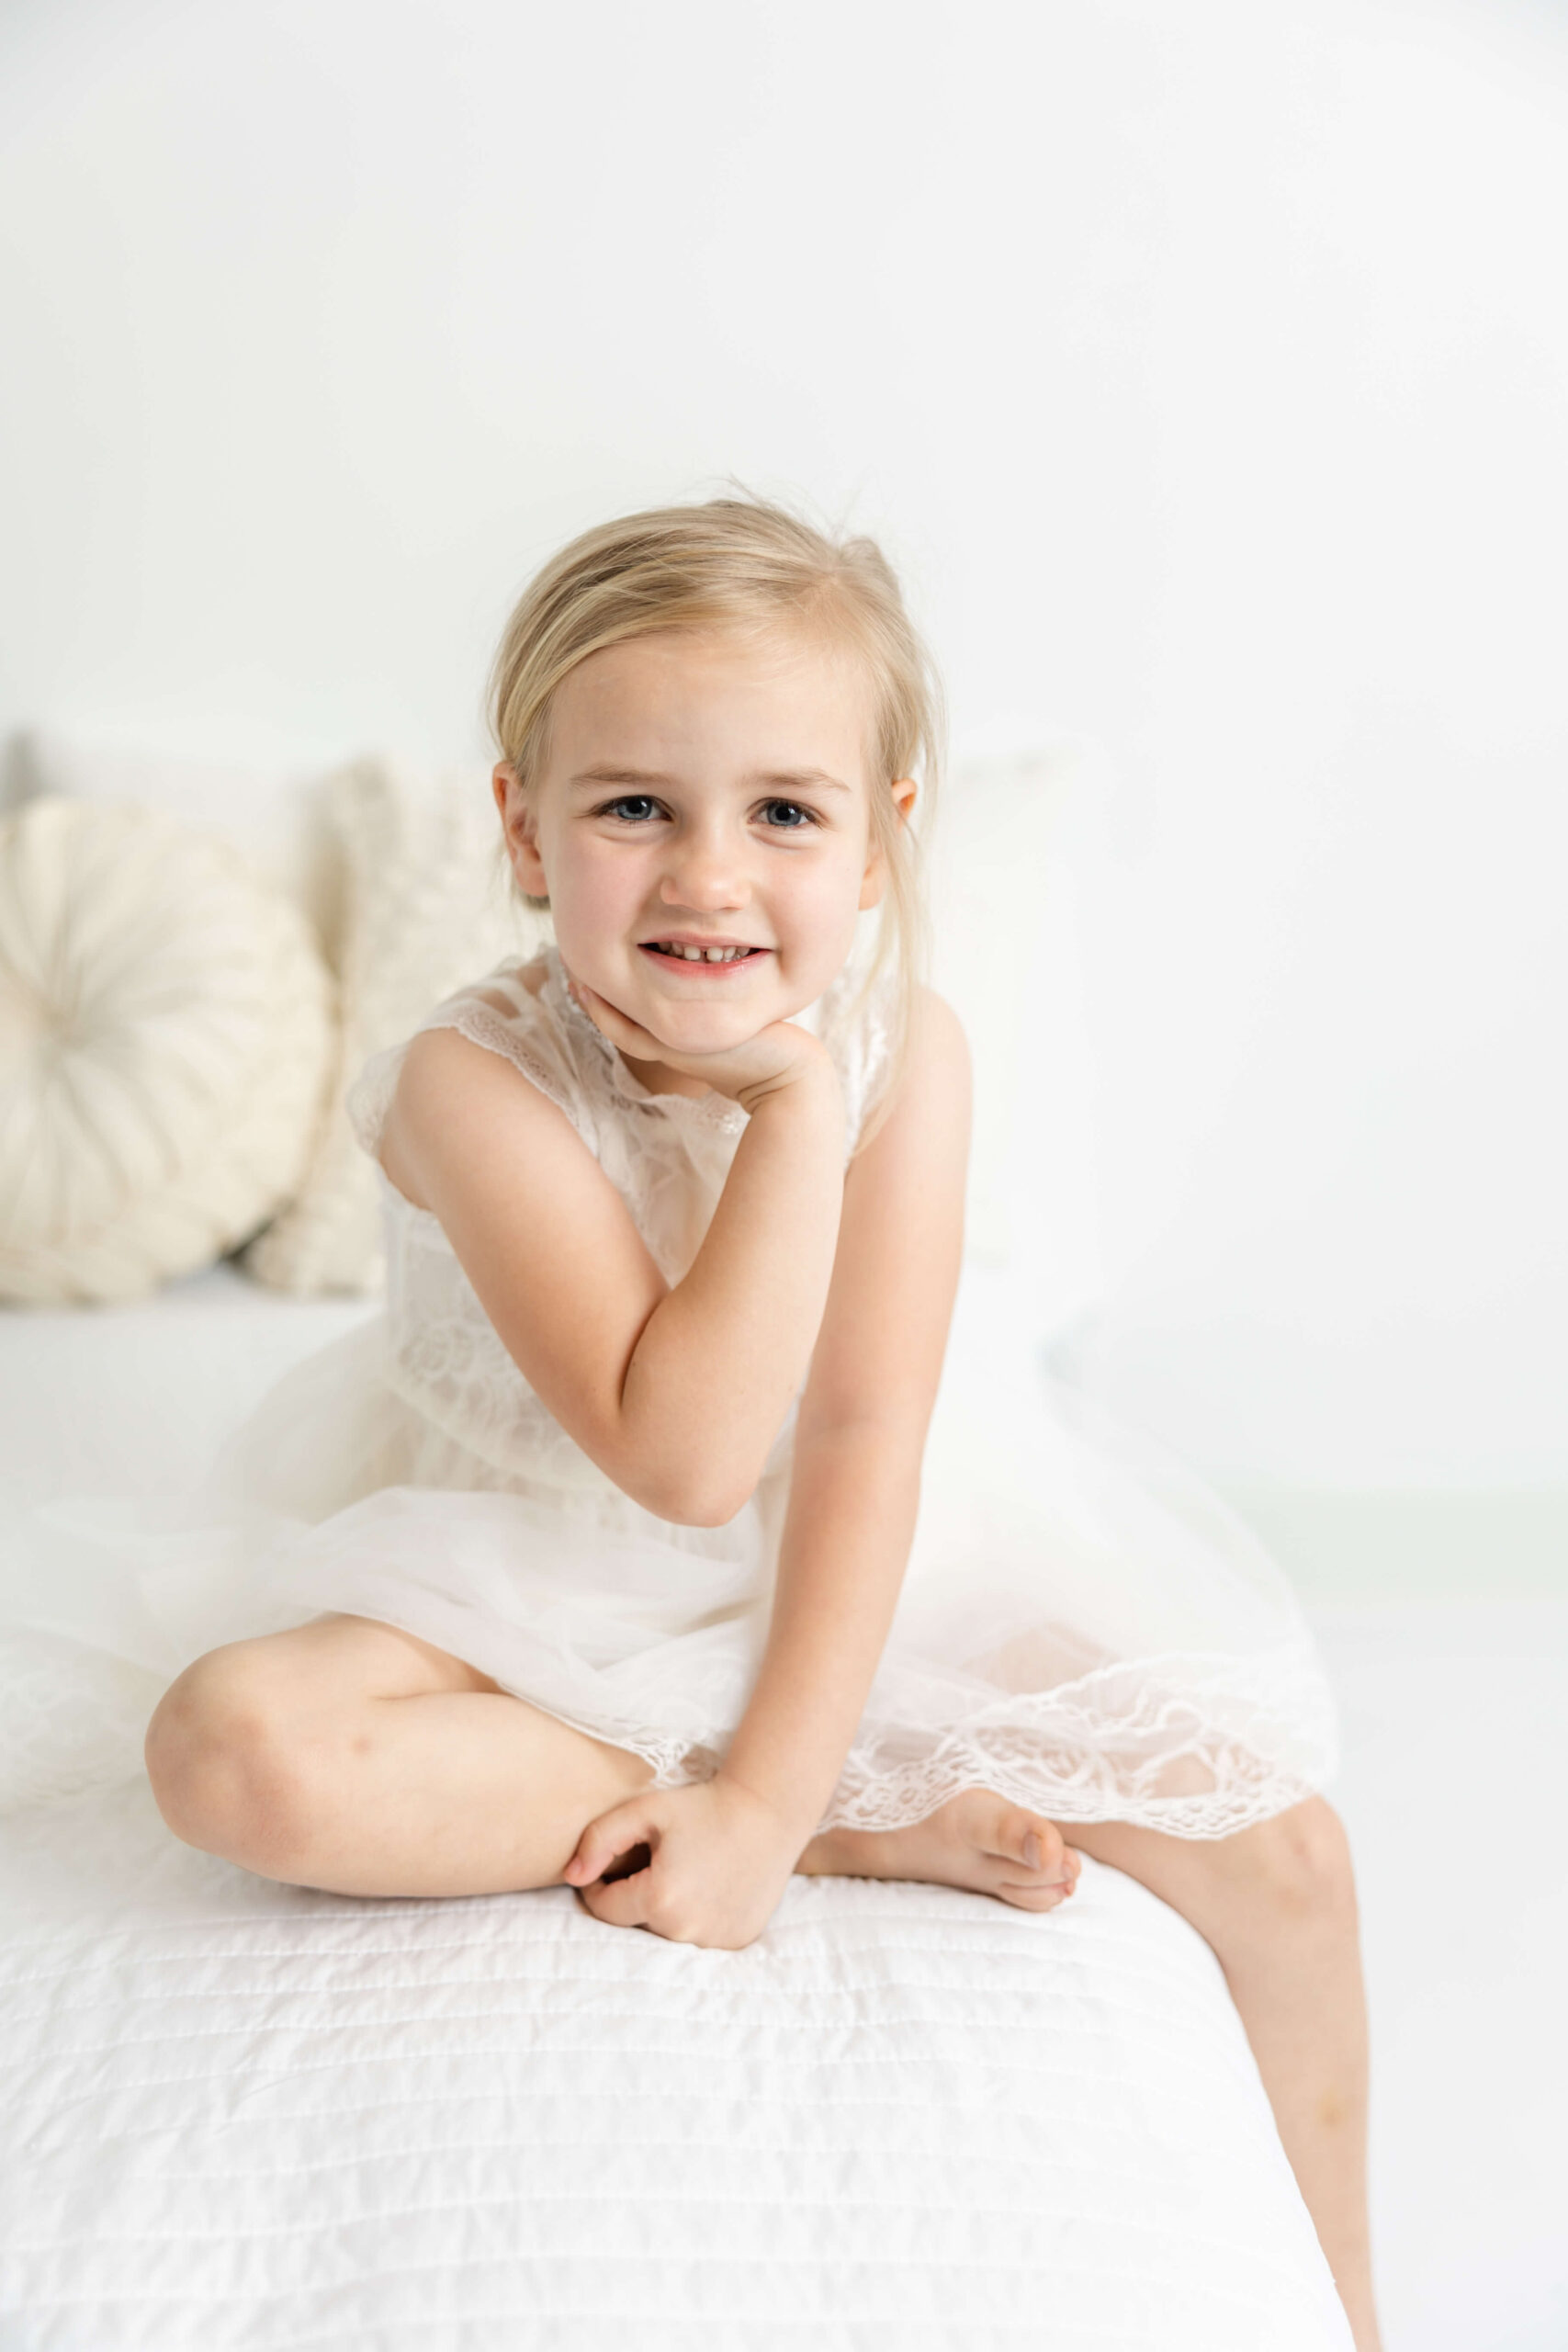 Captured 4 year old girl in white lace dress during child portrait session. 